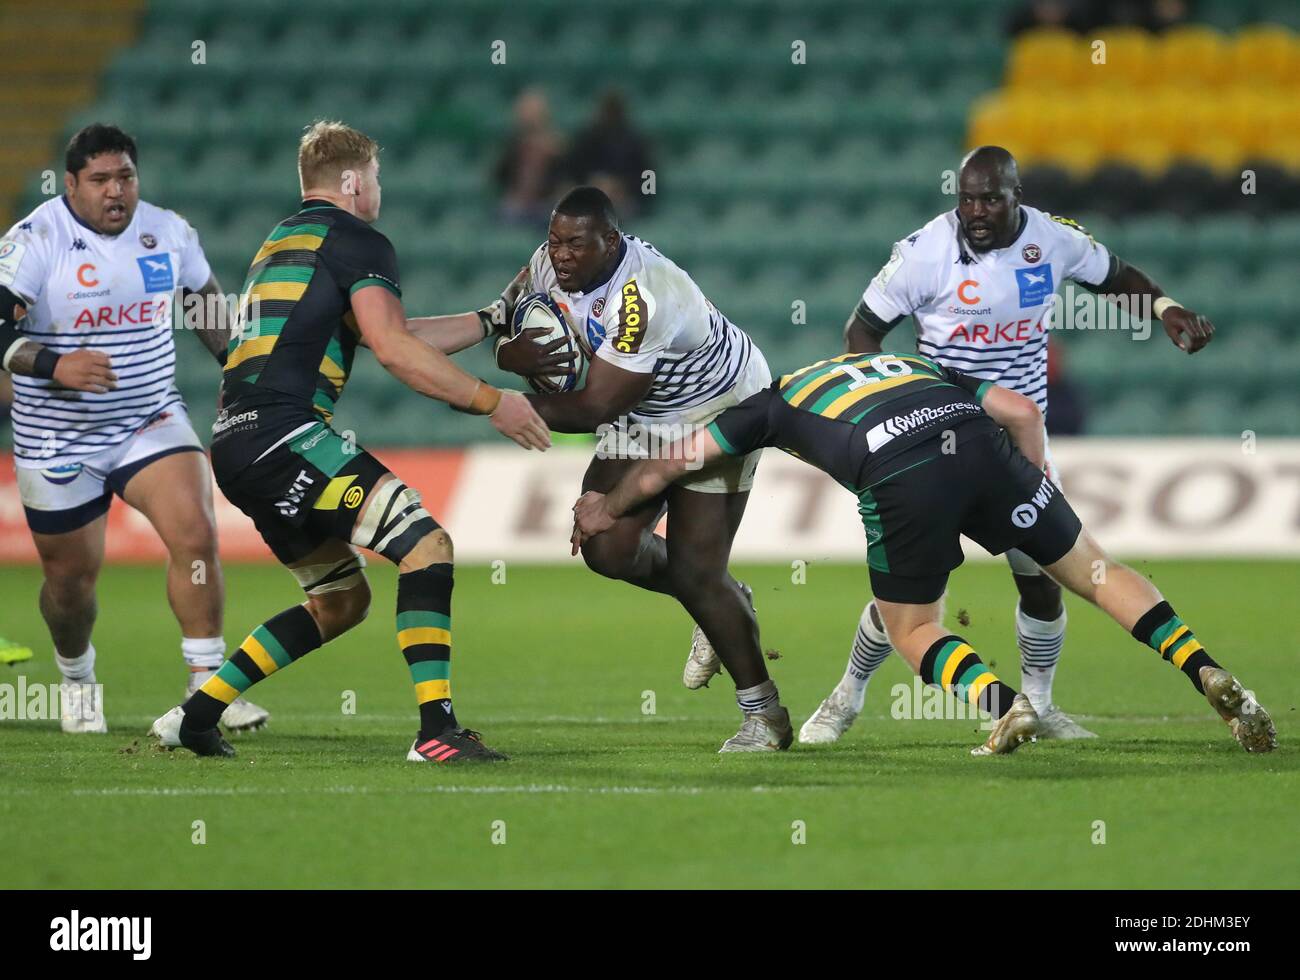 Bordeaux-Begles' Thierry Paiva is tackled by Northampton Saints' James Fish during the European Champions Cup Group A match at Franklin's Gardens, Northampton. Stock Photo